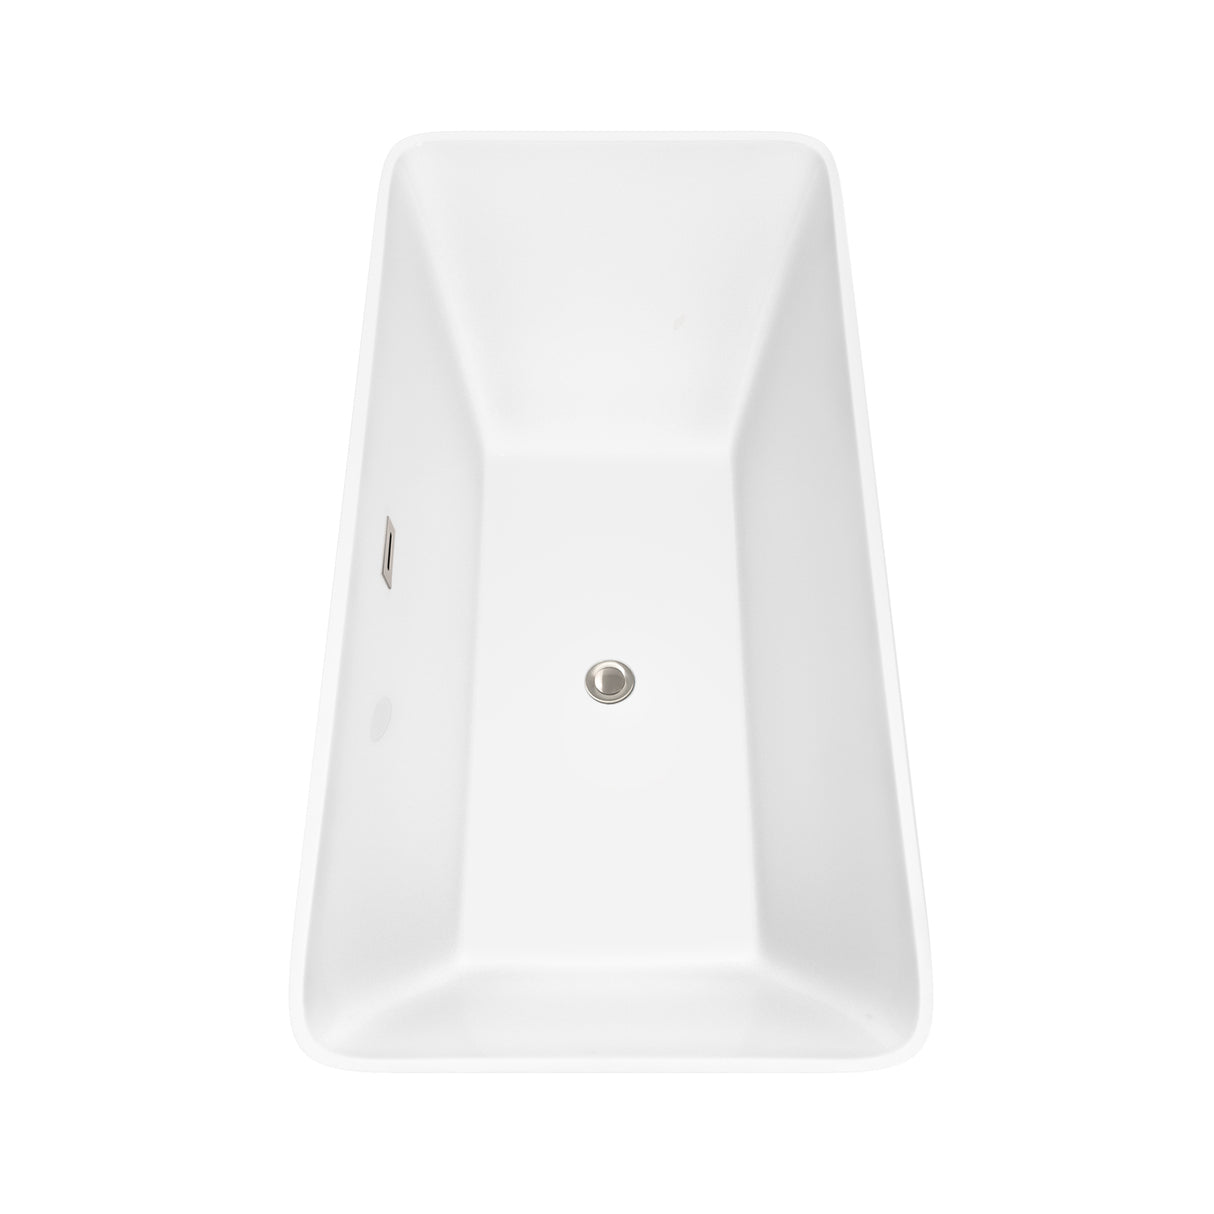 Tiffany 67 Inch Freestanding Bathtub in White with Brushed Nickel Drain and Overflow Trim